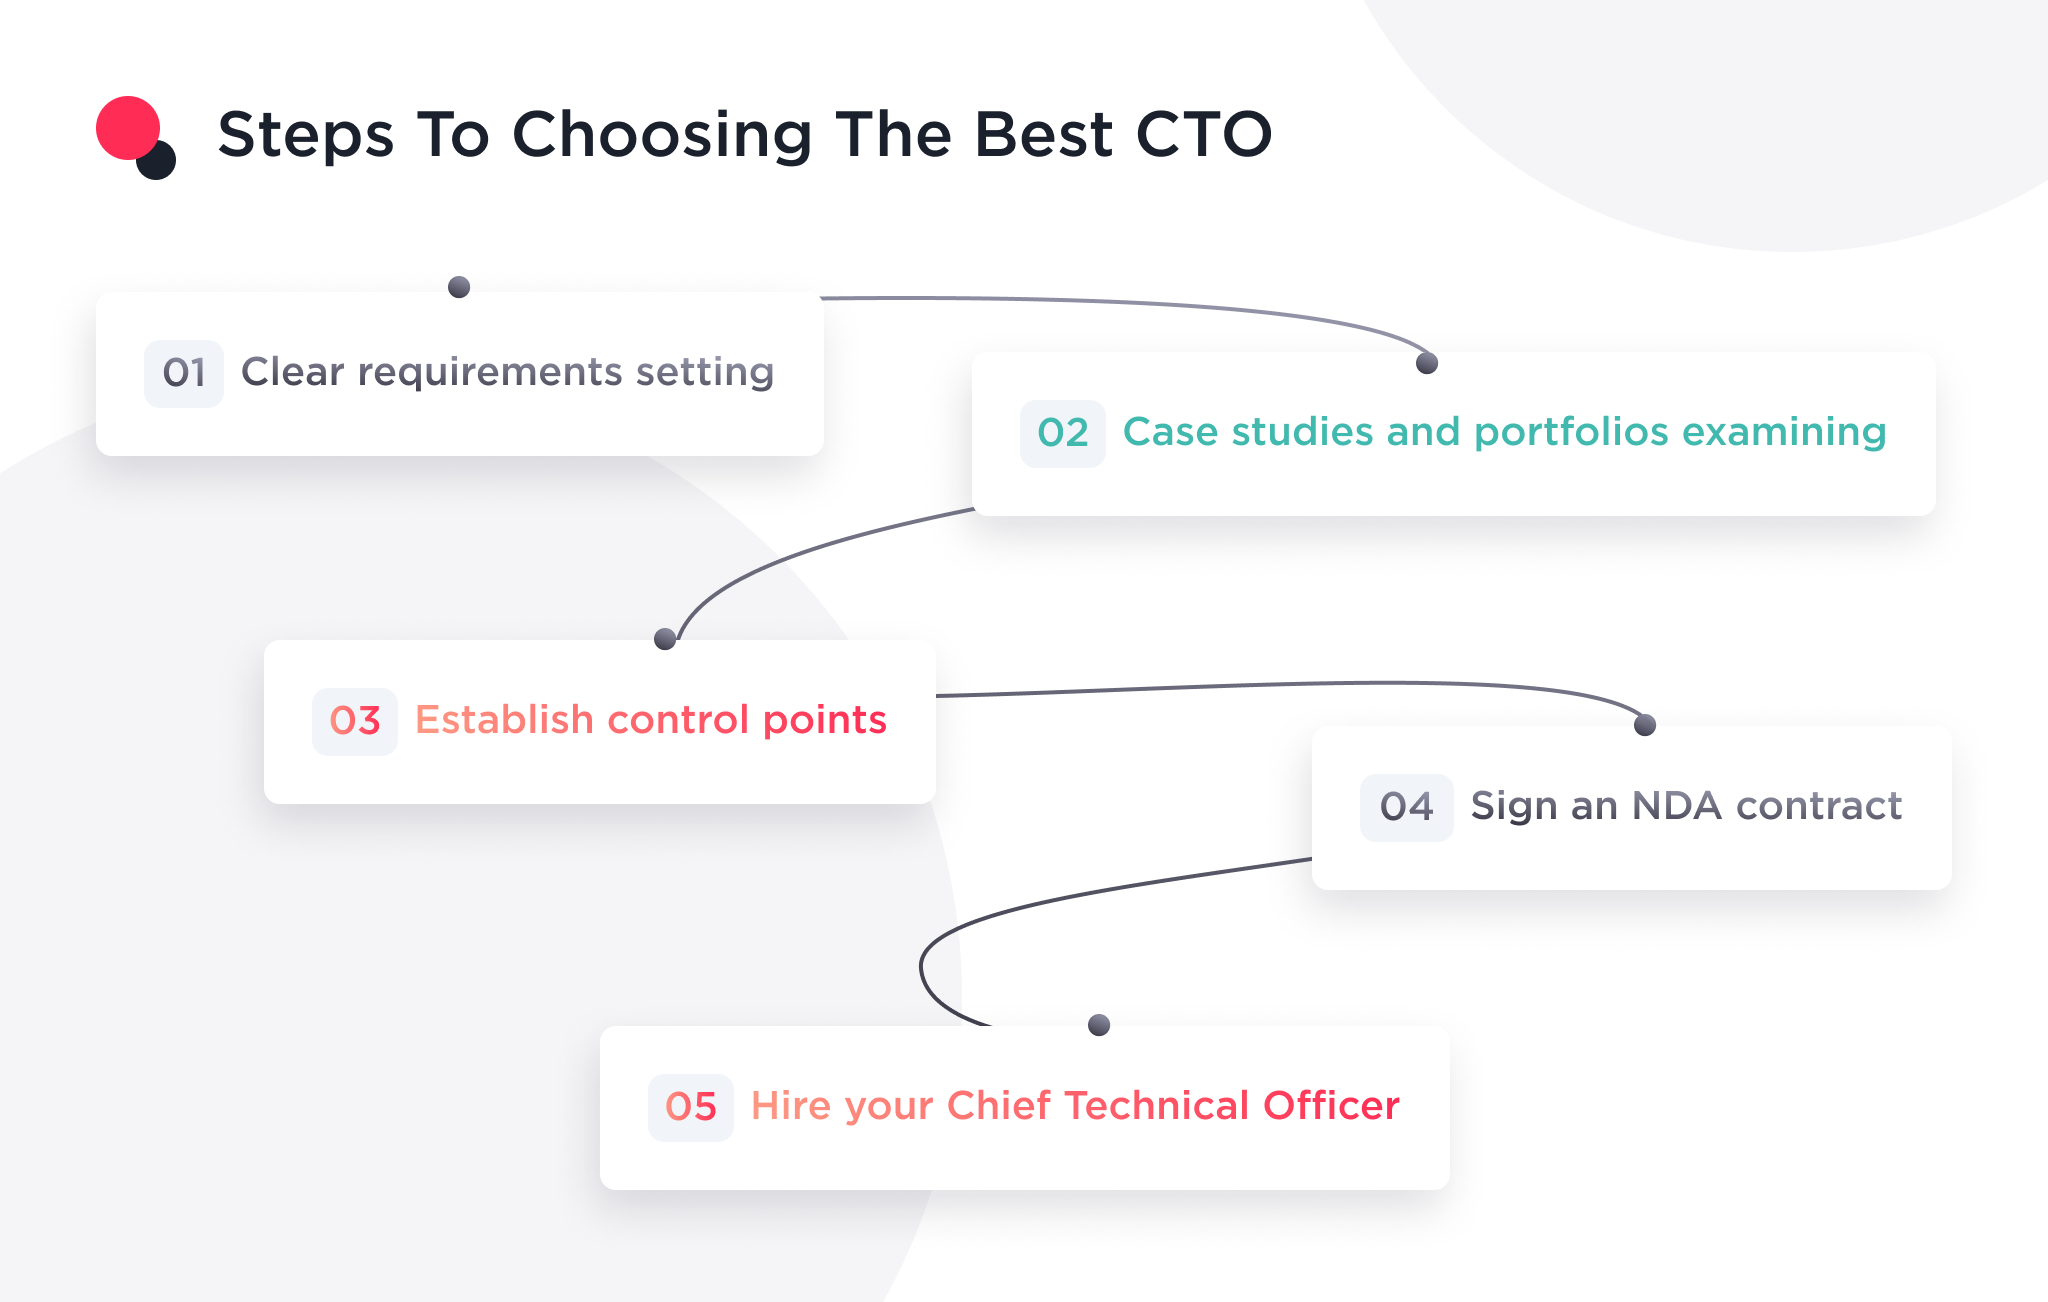 The image describes the steps of hiring a CTO